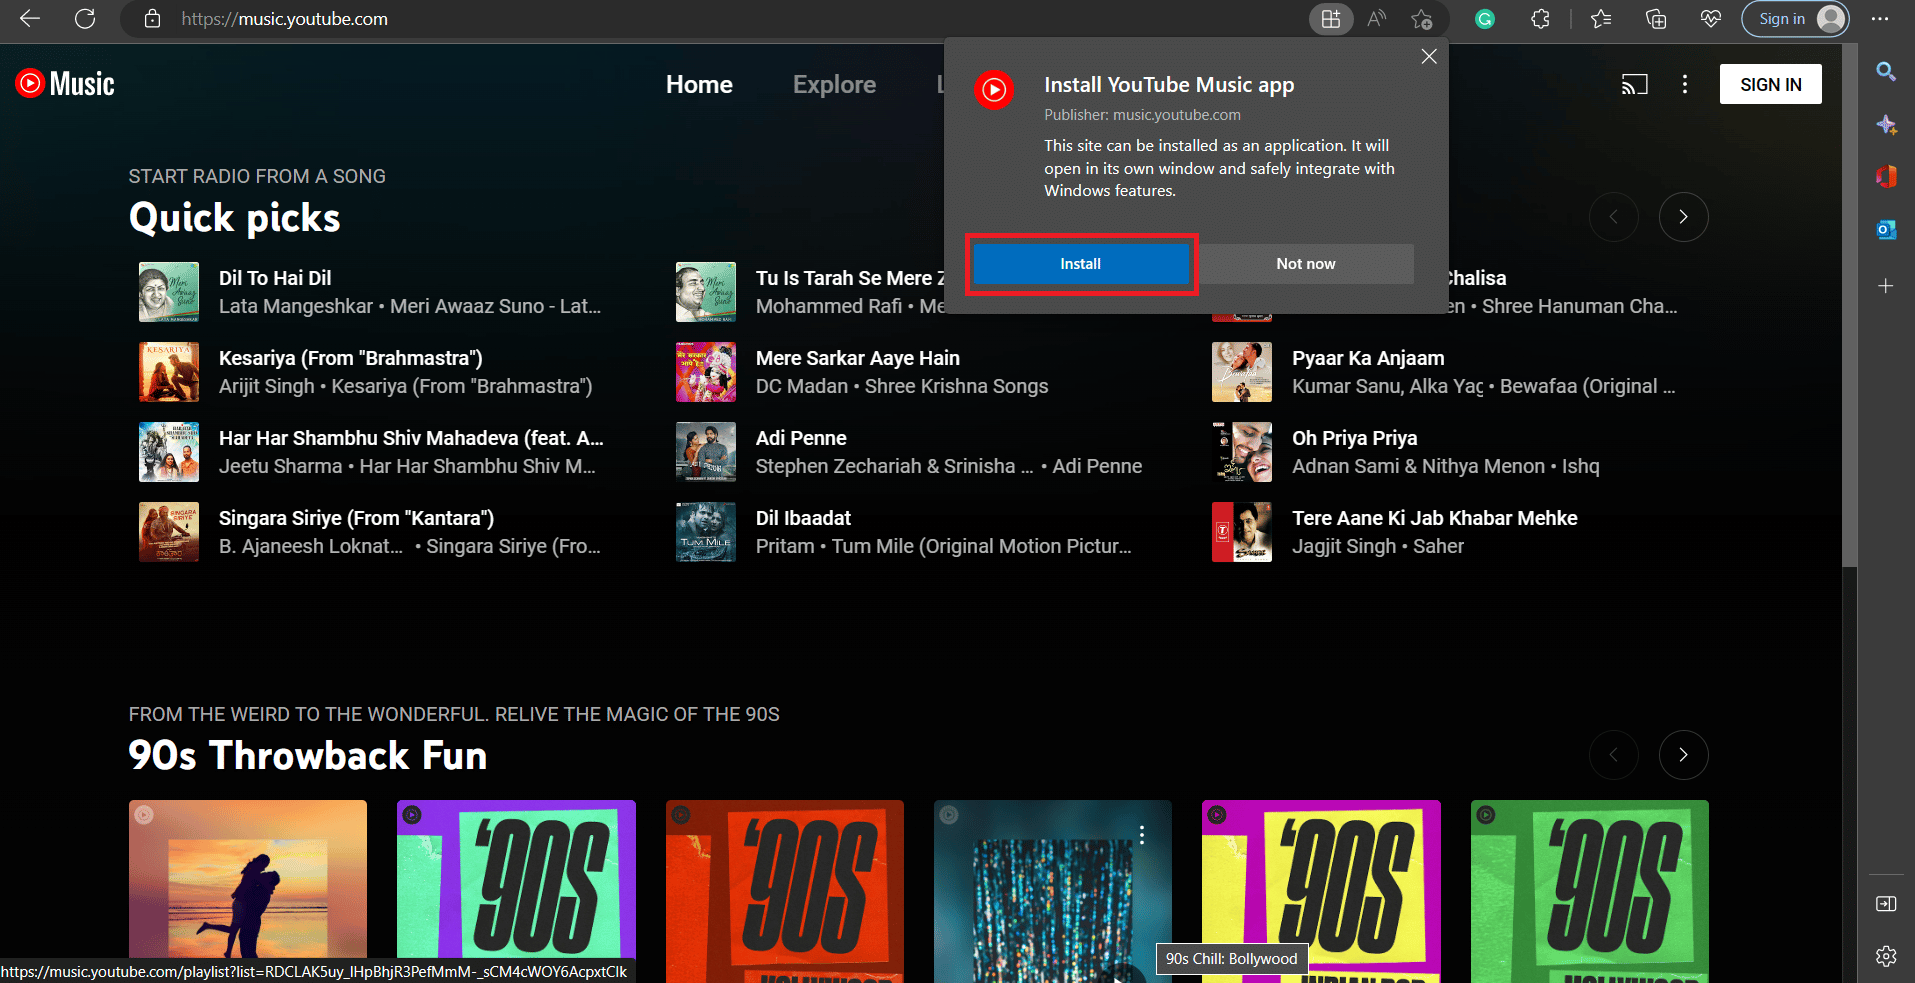 To install YouTube Music on your computer, click on Install in the prompt | How to install YouTube music desktop app Windows